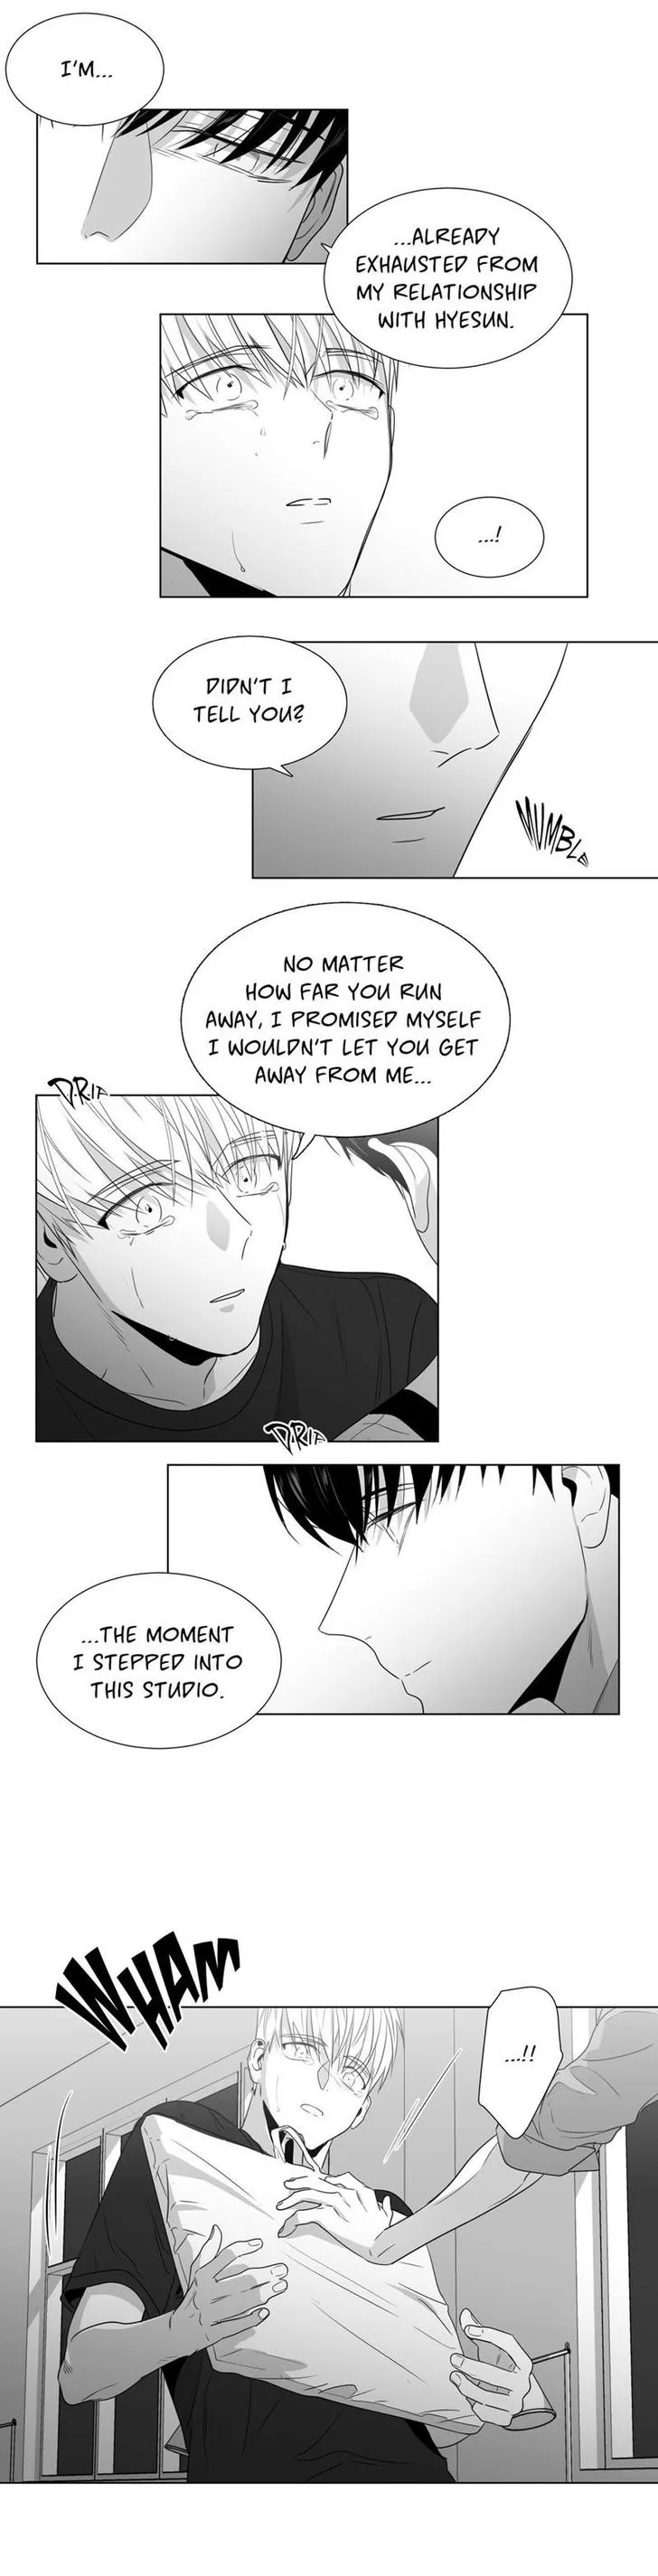 Lover Boy (Lezhin) Chapter 045 page 15